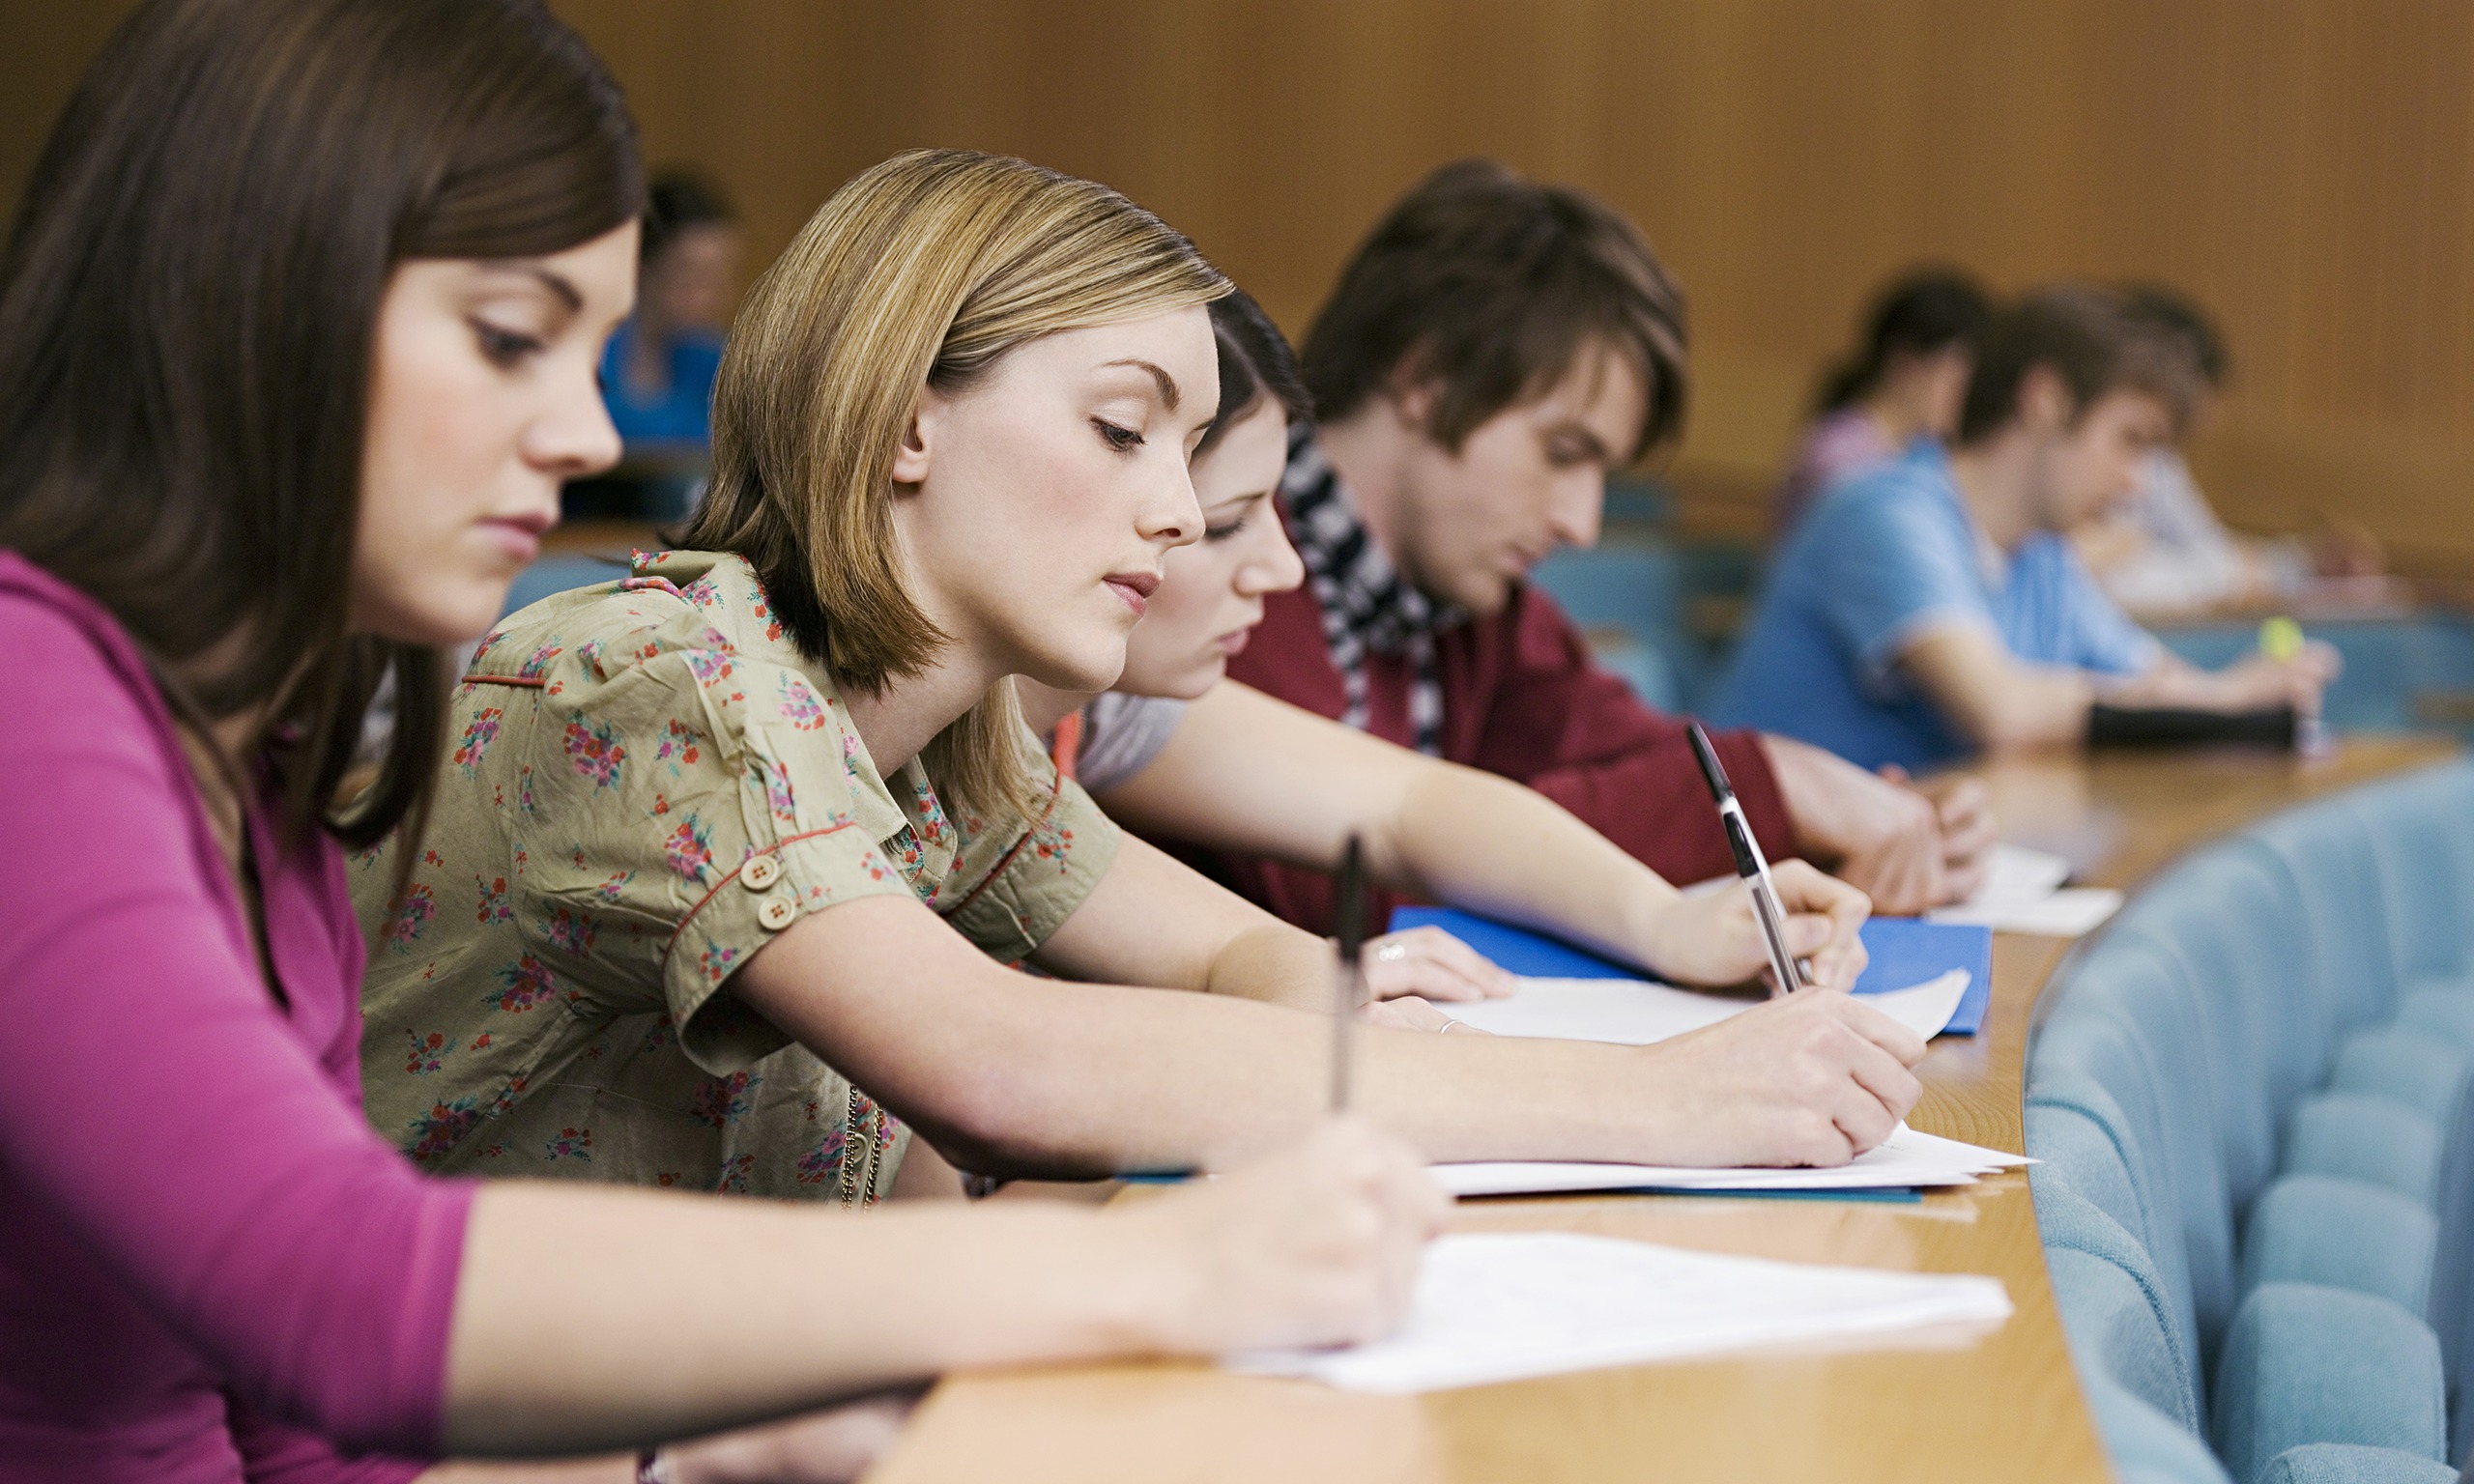 University students take notes in a lecture hall